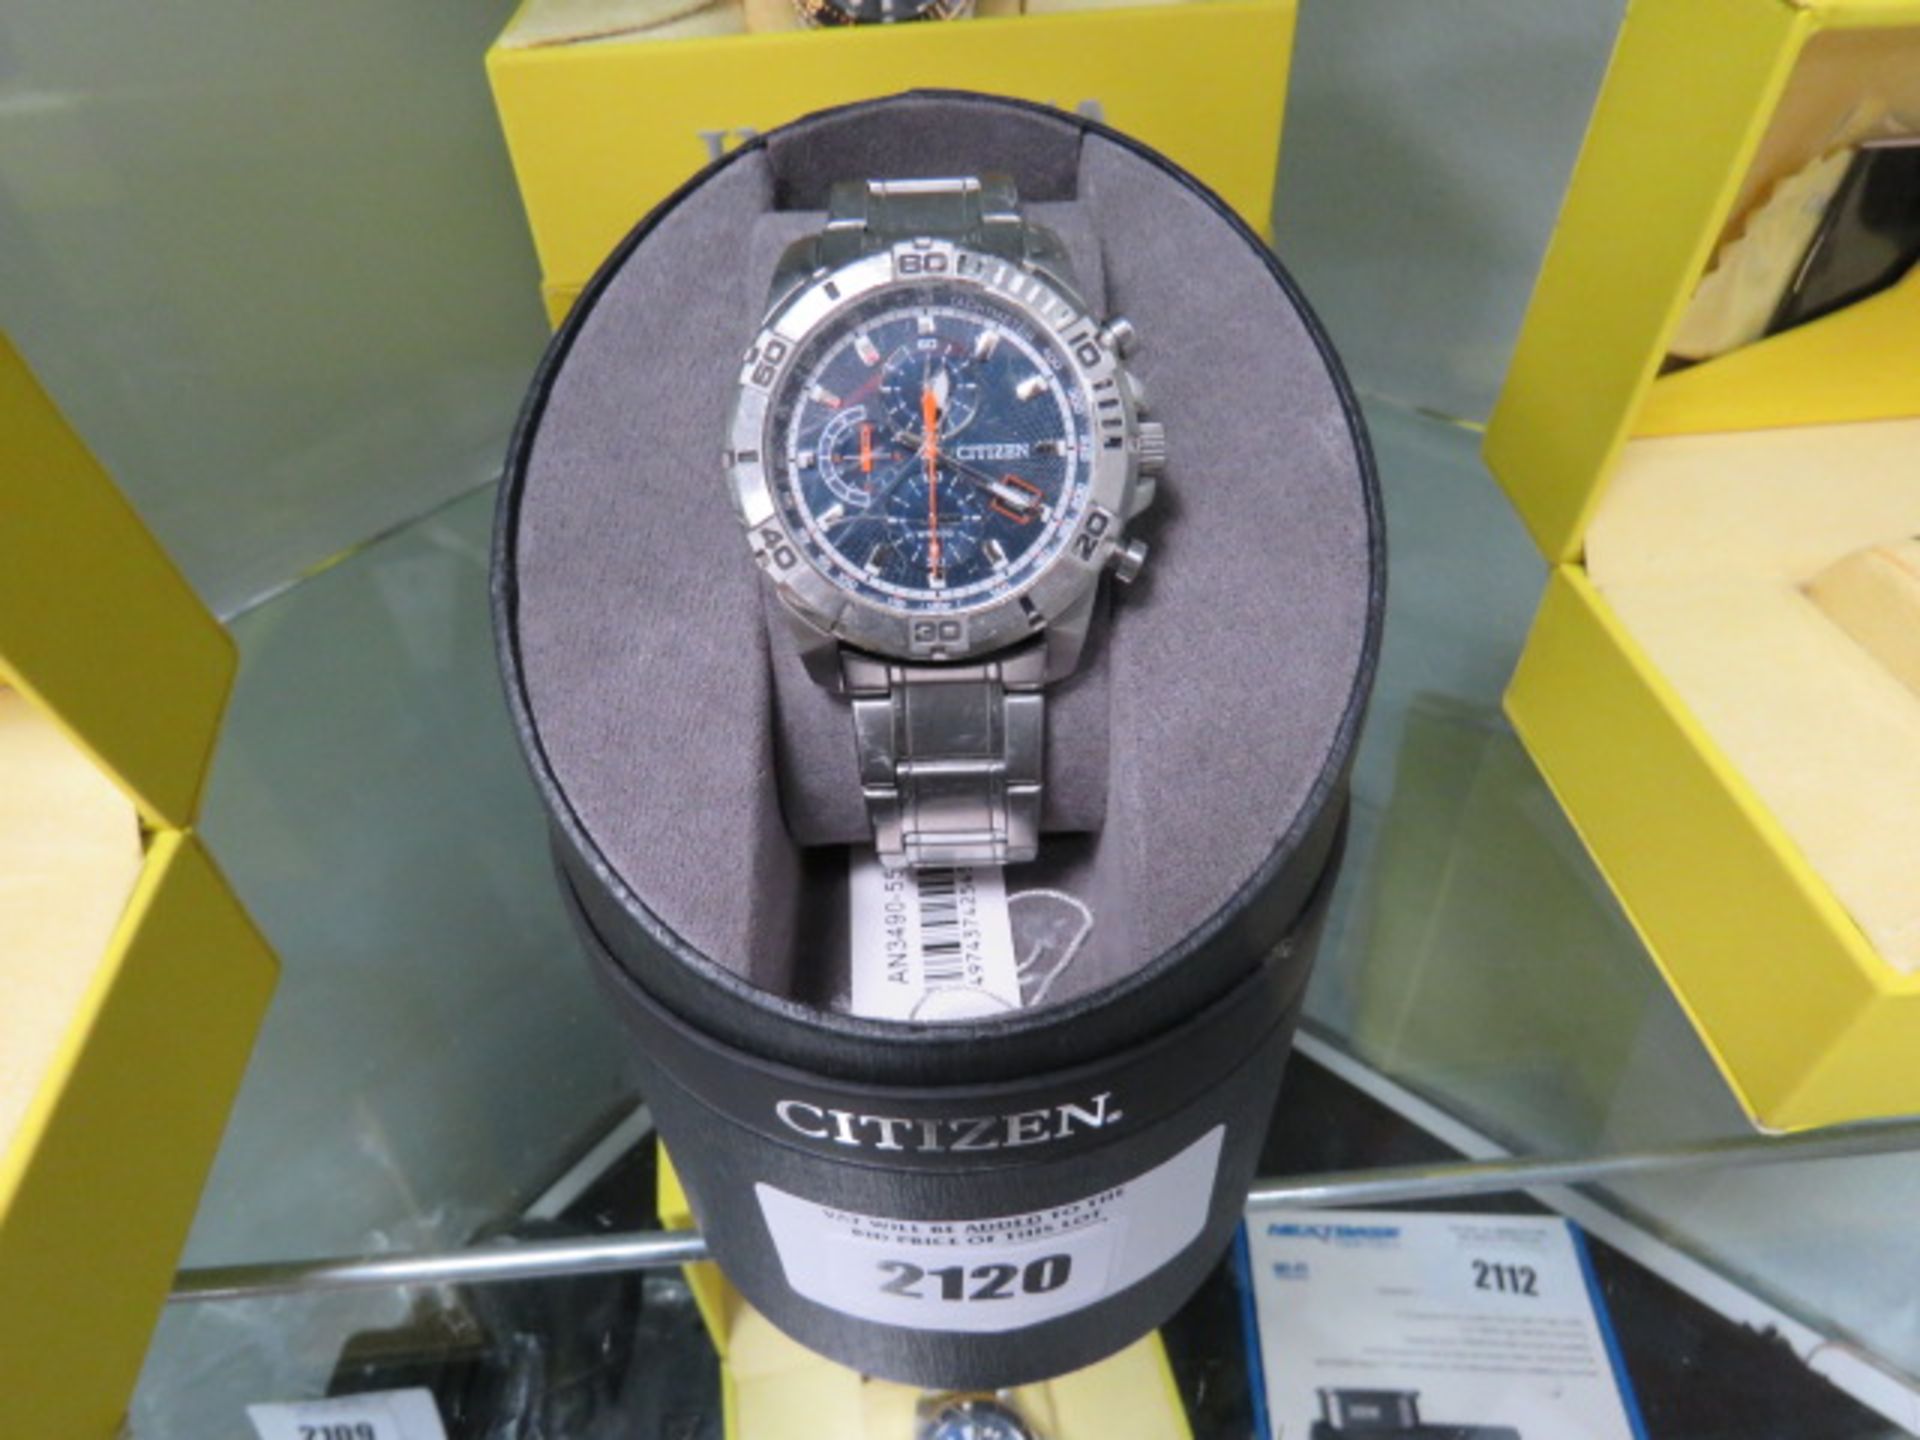 2042 - Citizen chronograph stainless steel strap wristwatch with scratch on glass